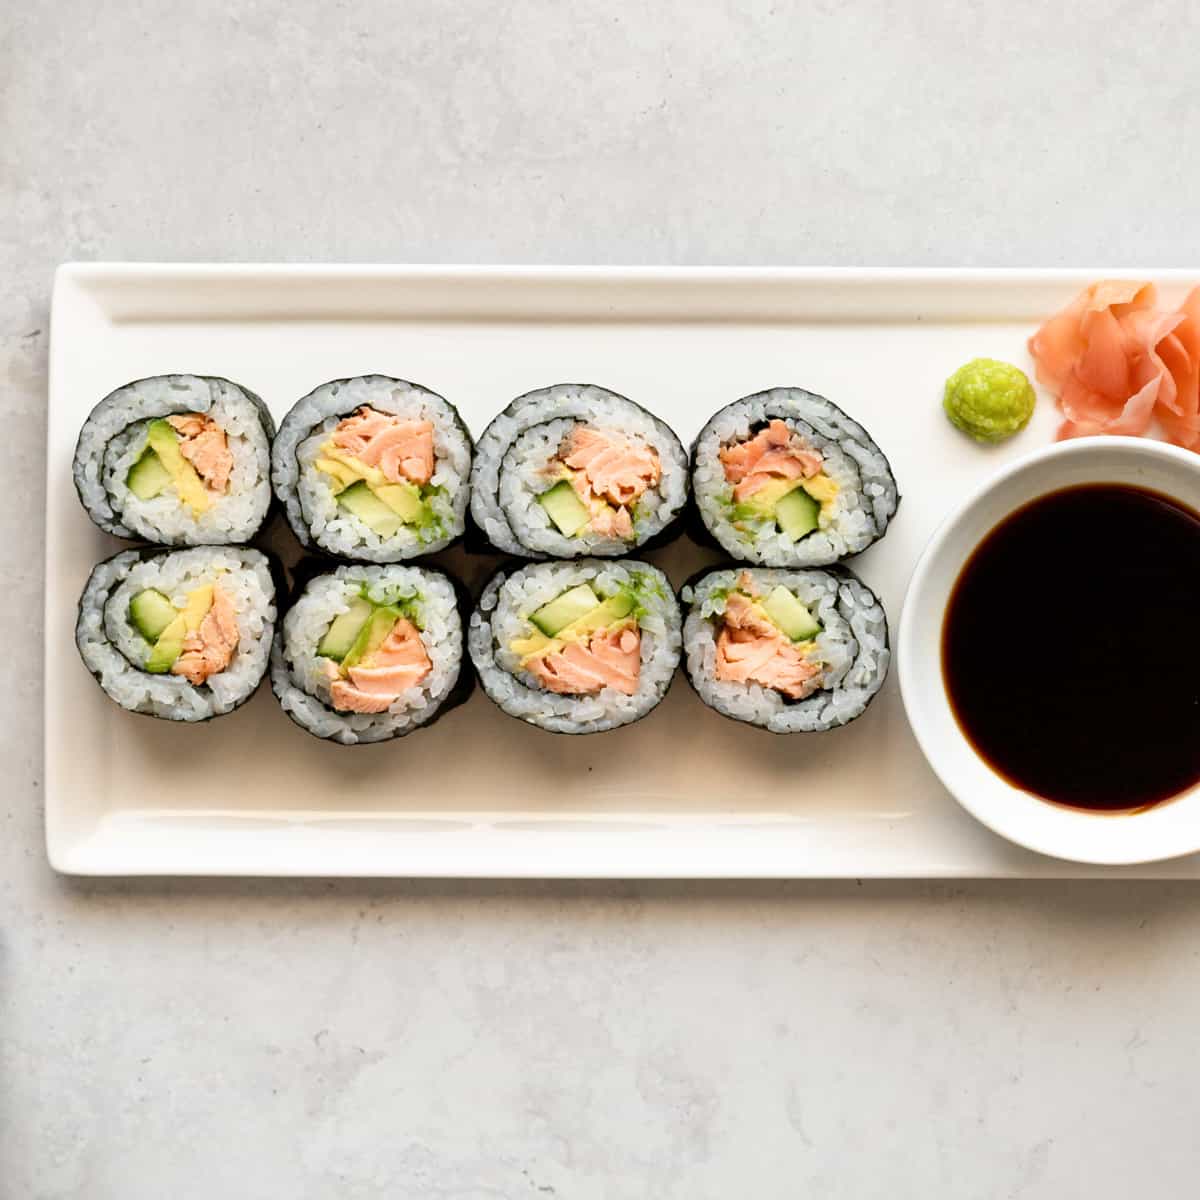 DIY Sushi at Home with a How-to Video